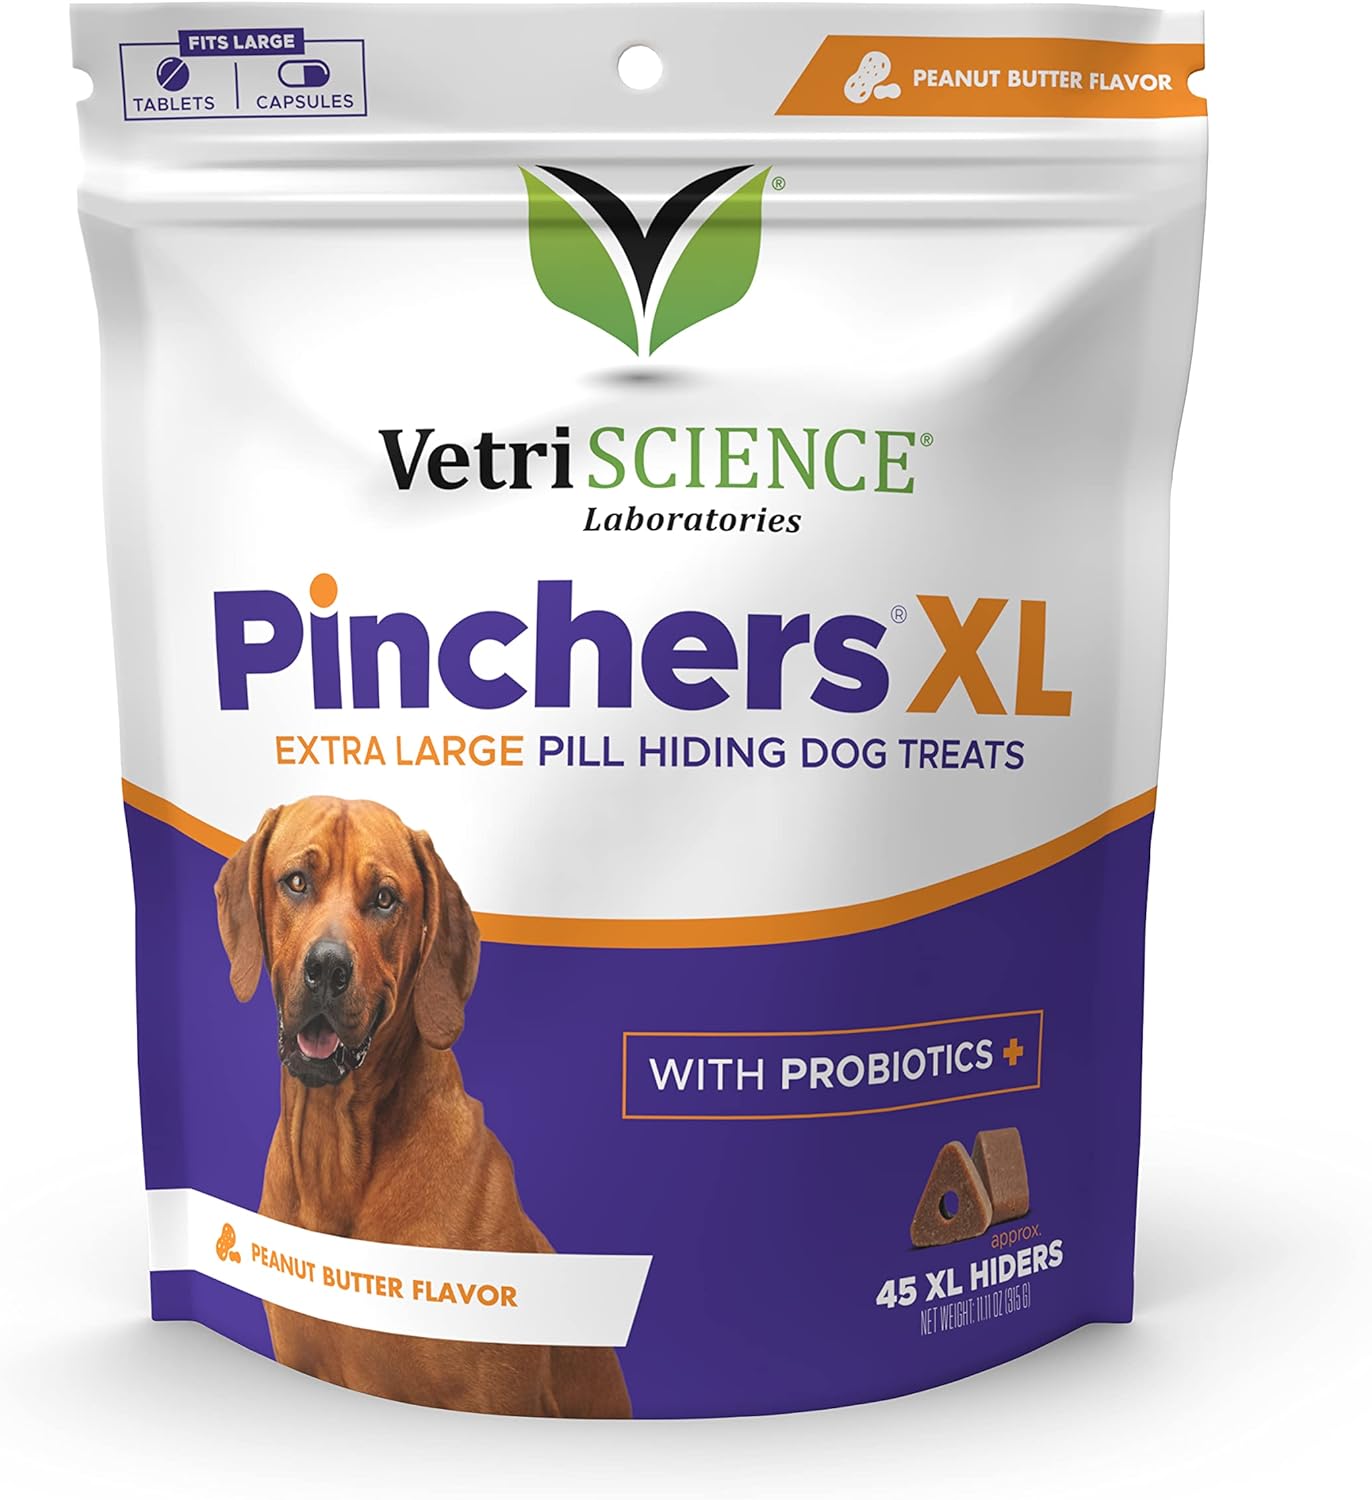 VETRISCIENCE Pinchers XL Pill Hiding Treats for Dogs – Extra Large Pill Hiders with Probiotics, Great for Medicine, Large Capsules and Tablets